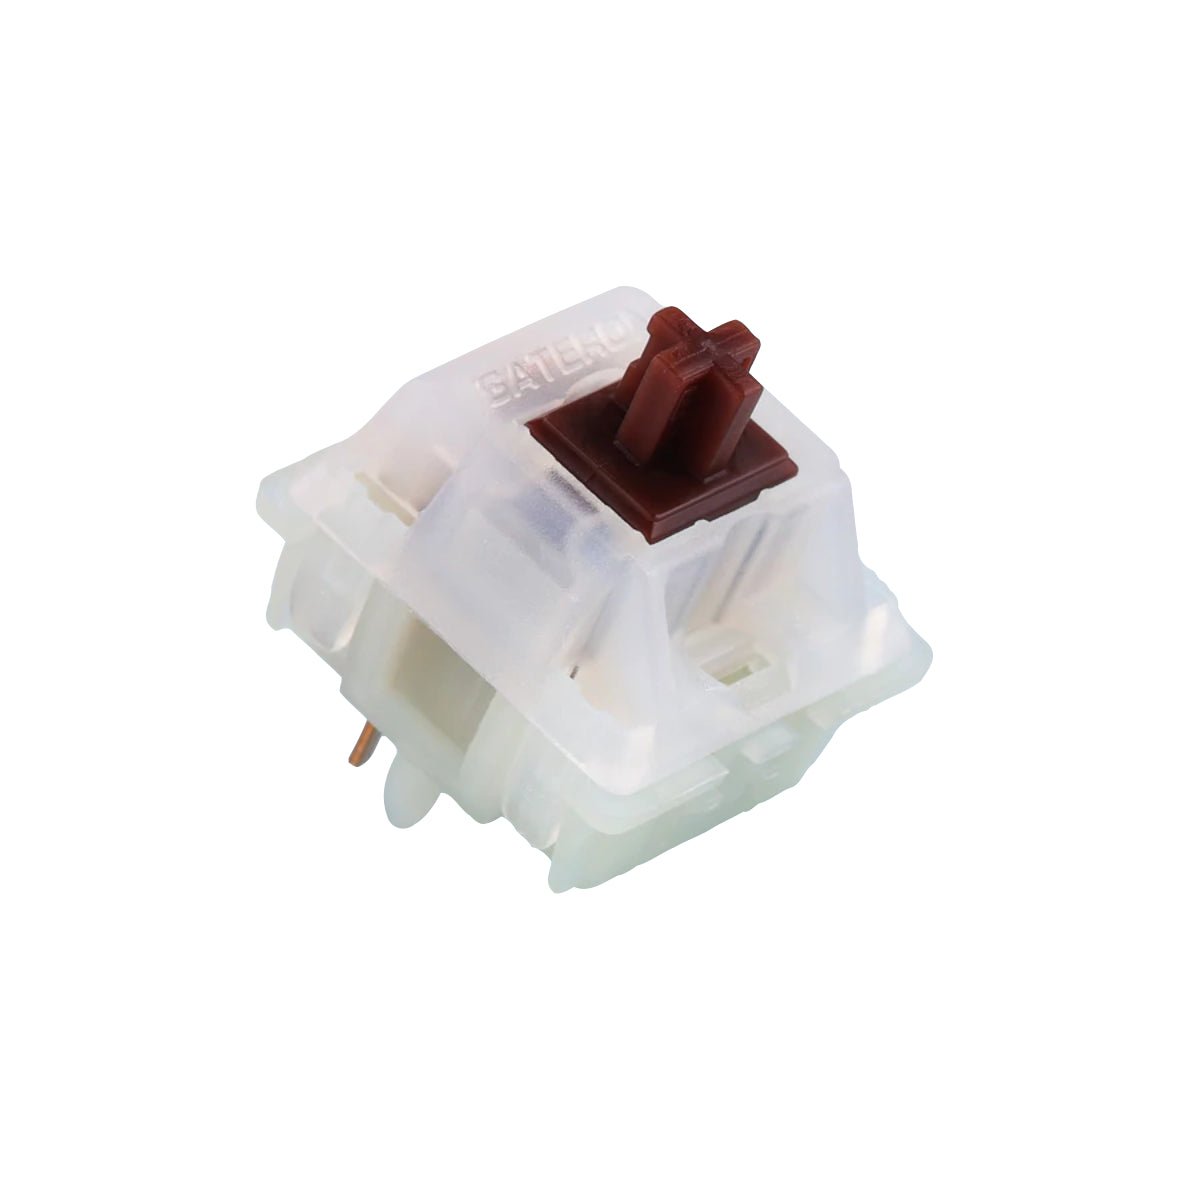 KBD Fans Gateron Milky Housing Switches - Brown - Store 974 | ستور ٩٧٤